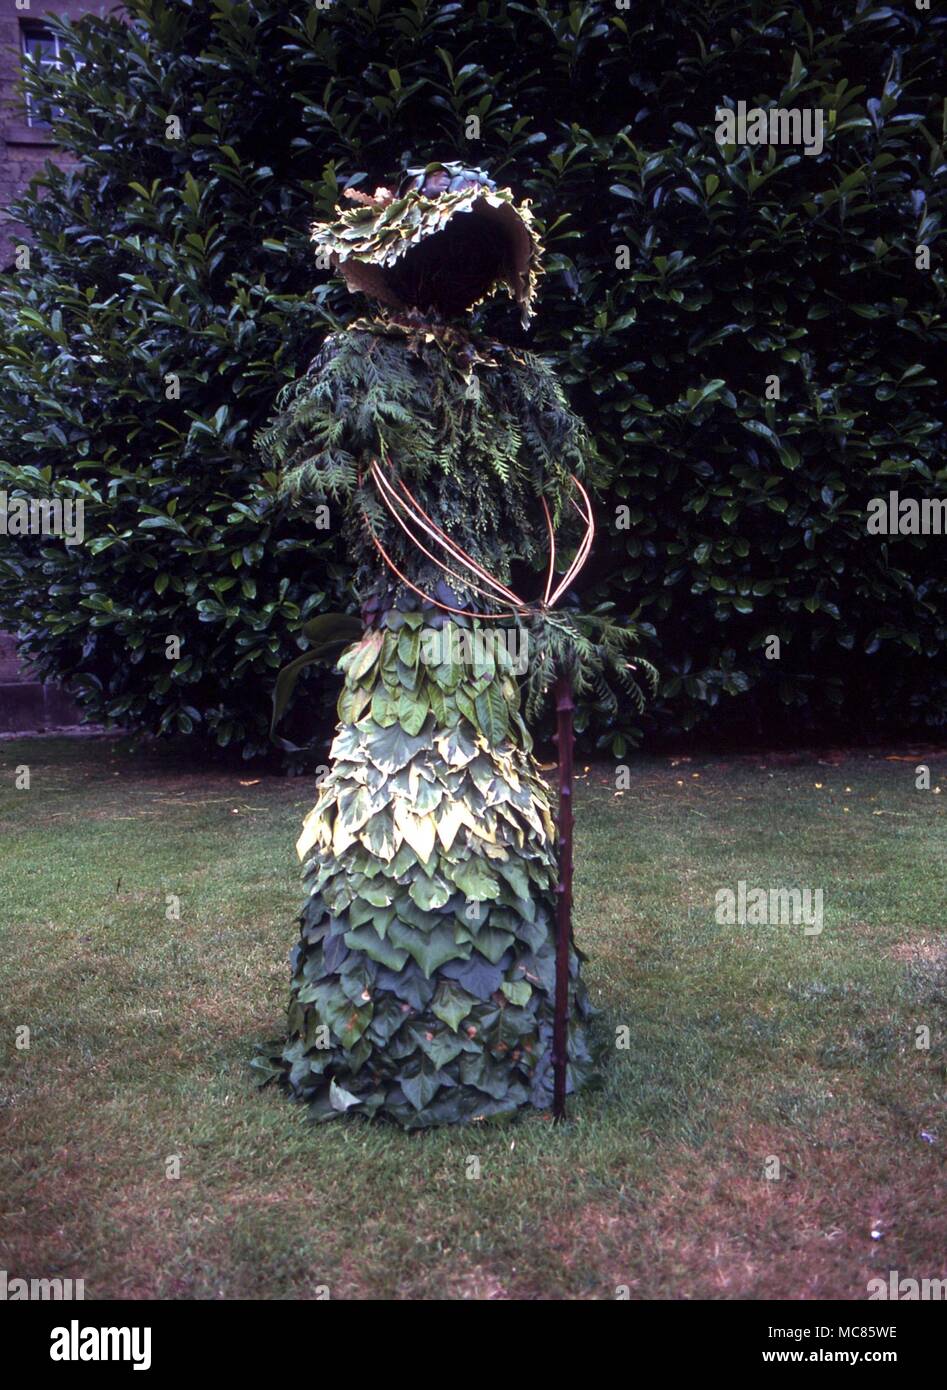 Green Man Life-sized figure made from leaves and plants. From a floral display in the village of West Marton, North Yorkshire Stock Photo